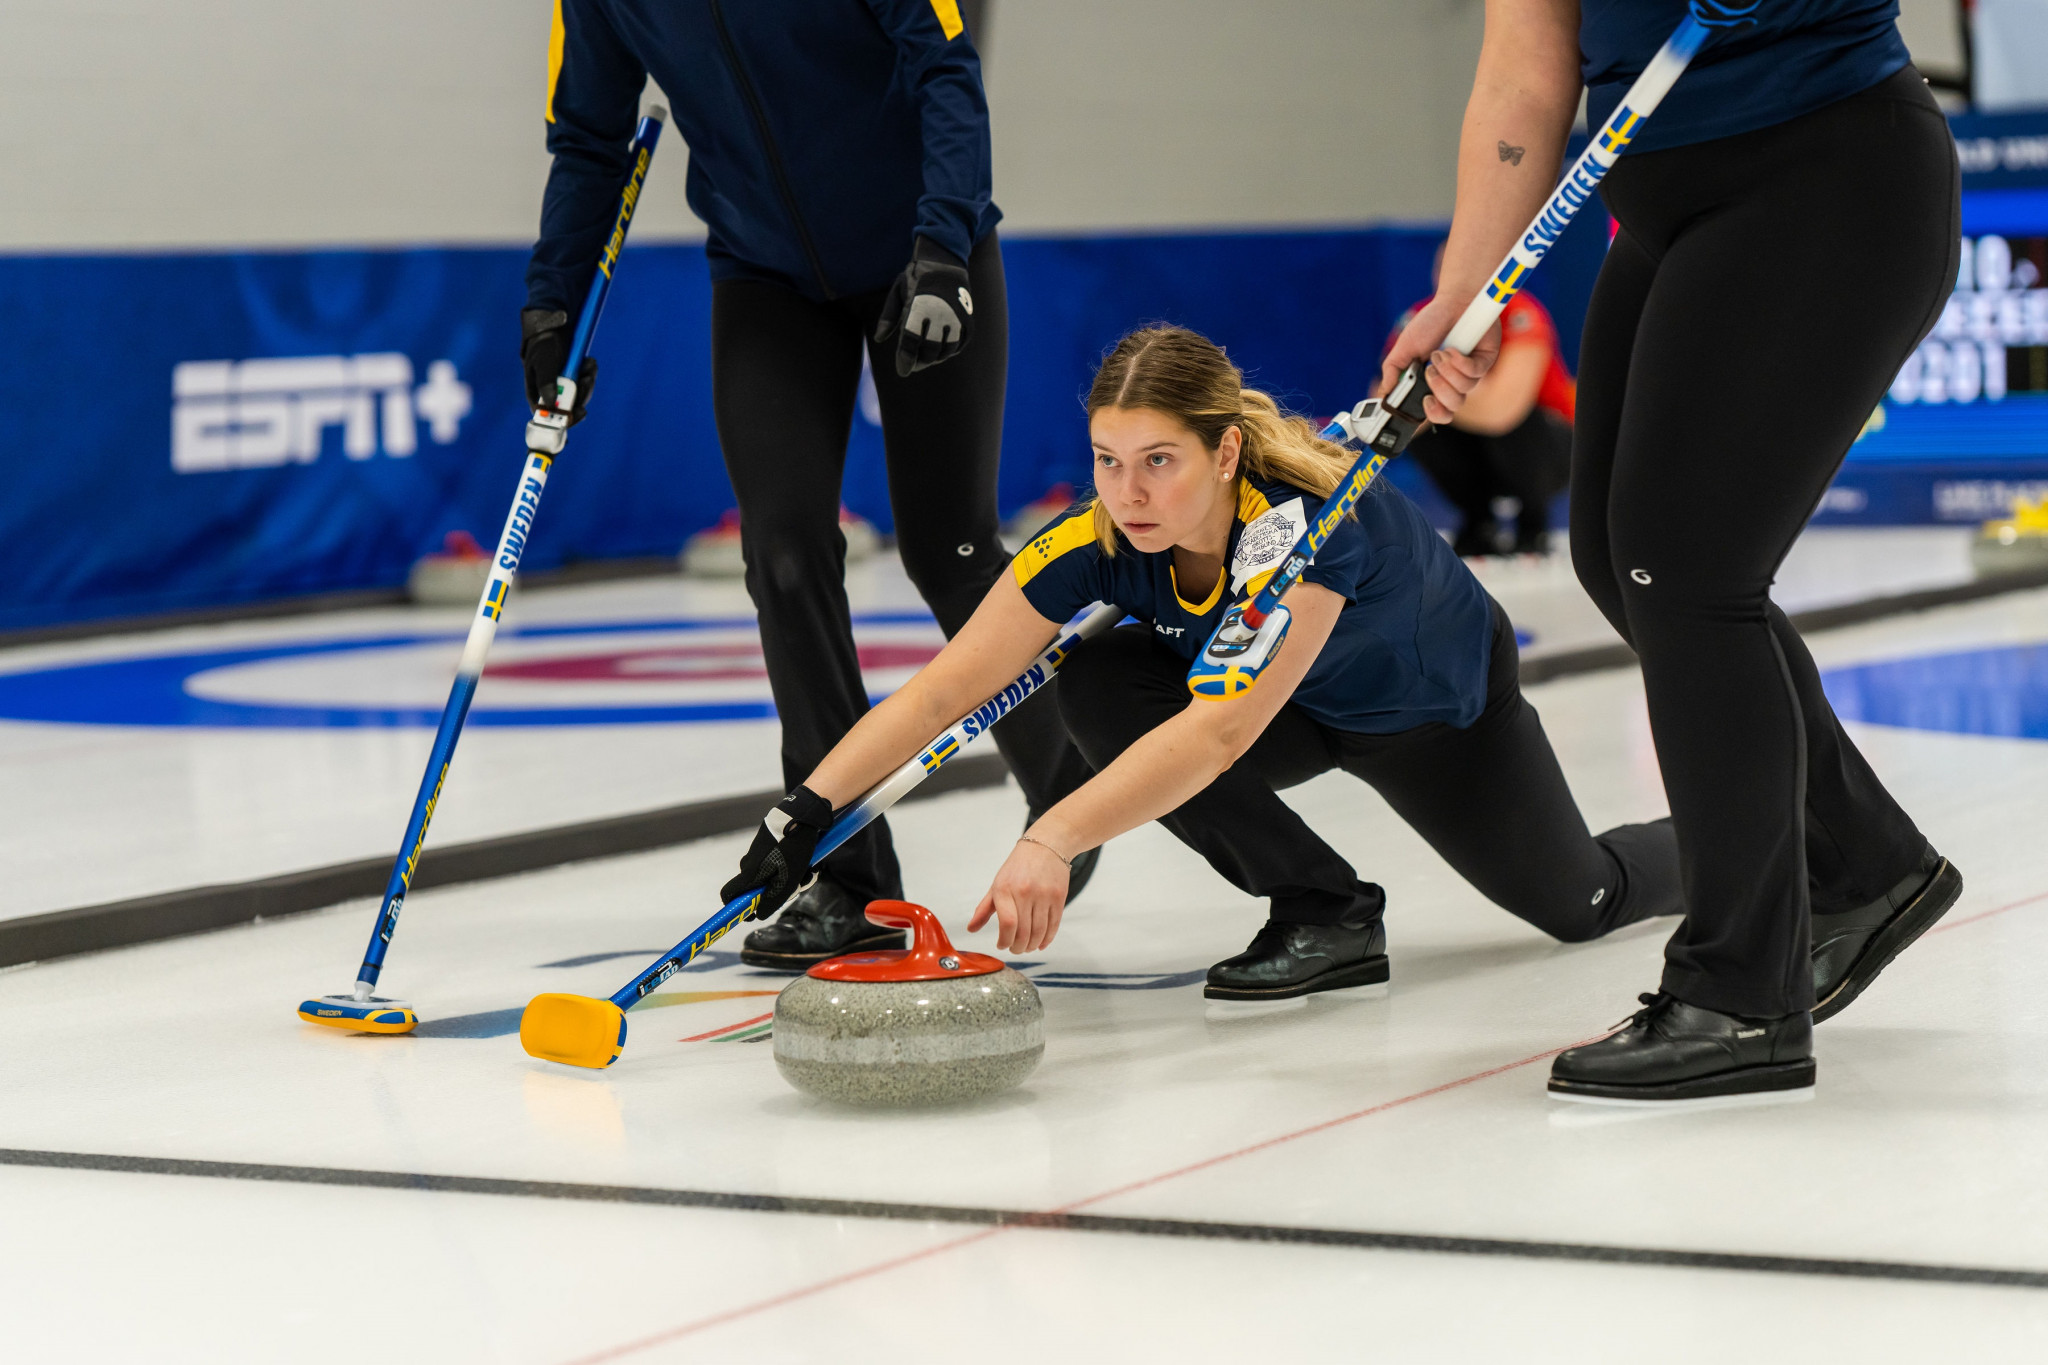 Sweden were among the team in curling action at the Saranac Lake Civic Center ©FISU